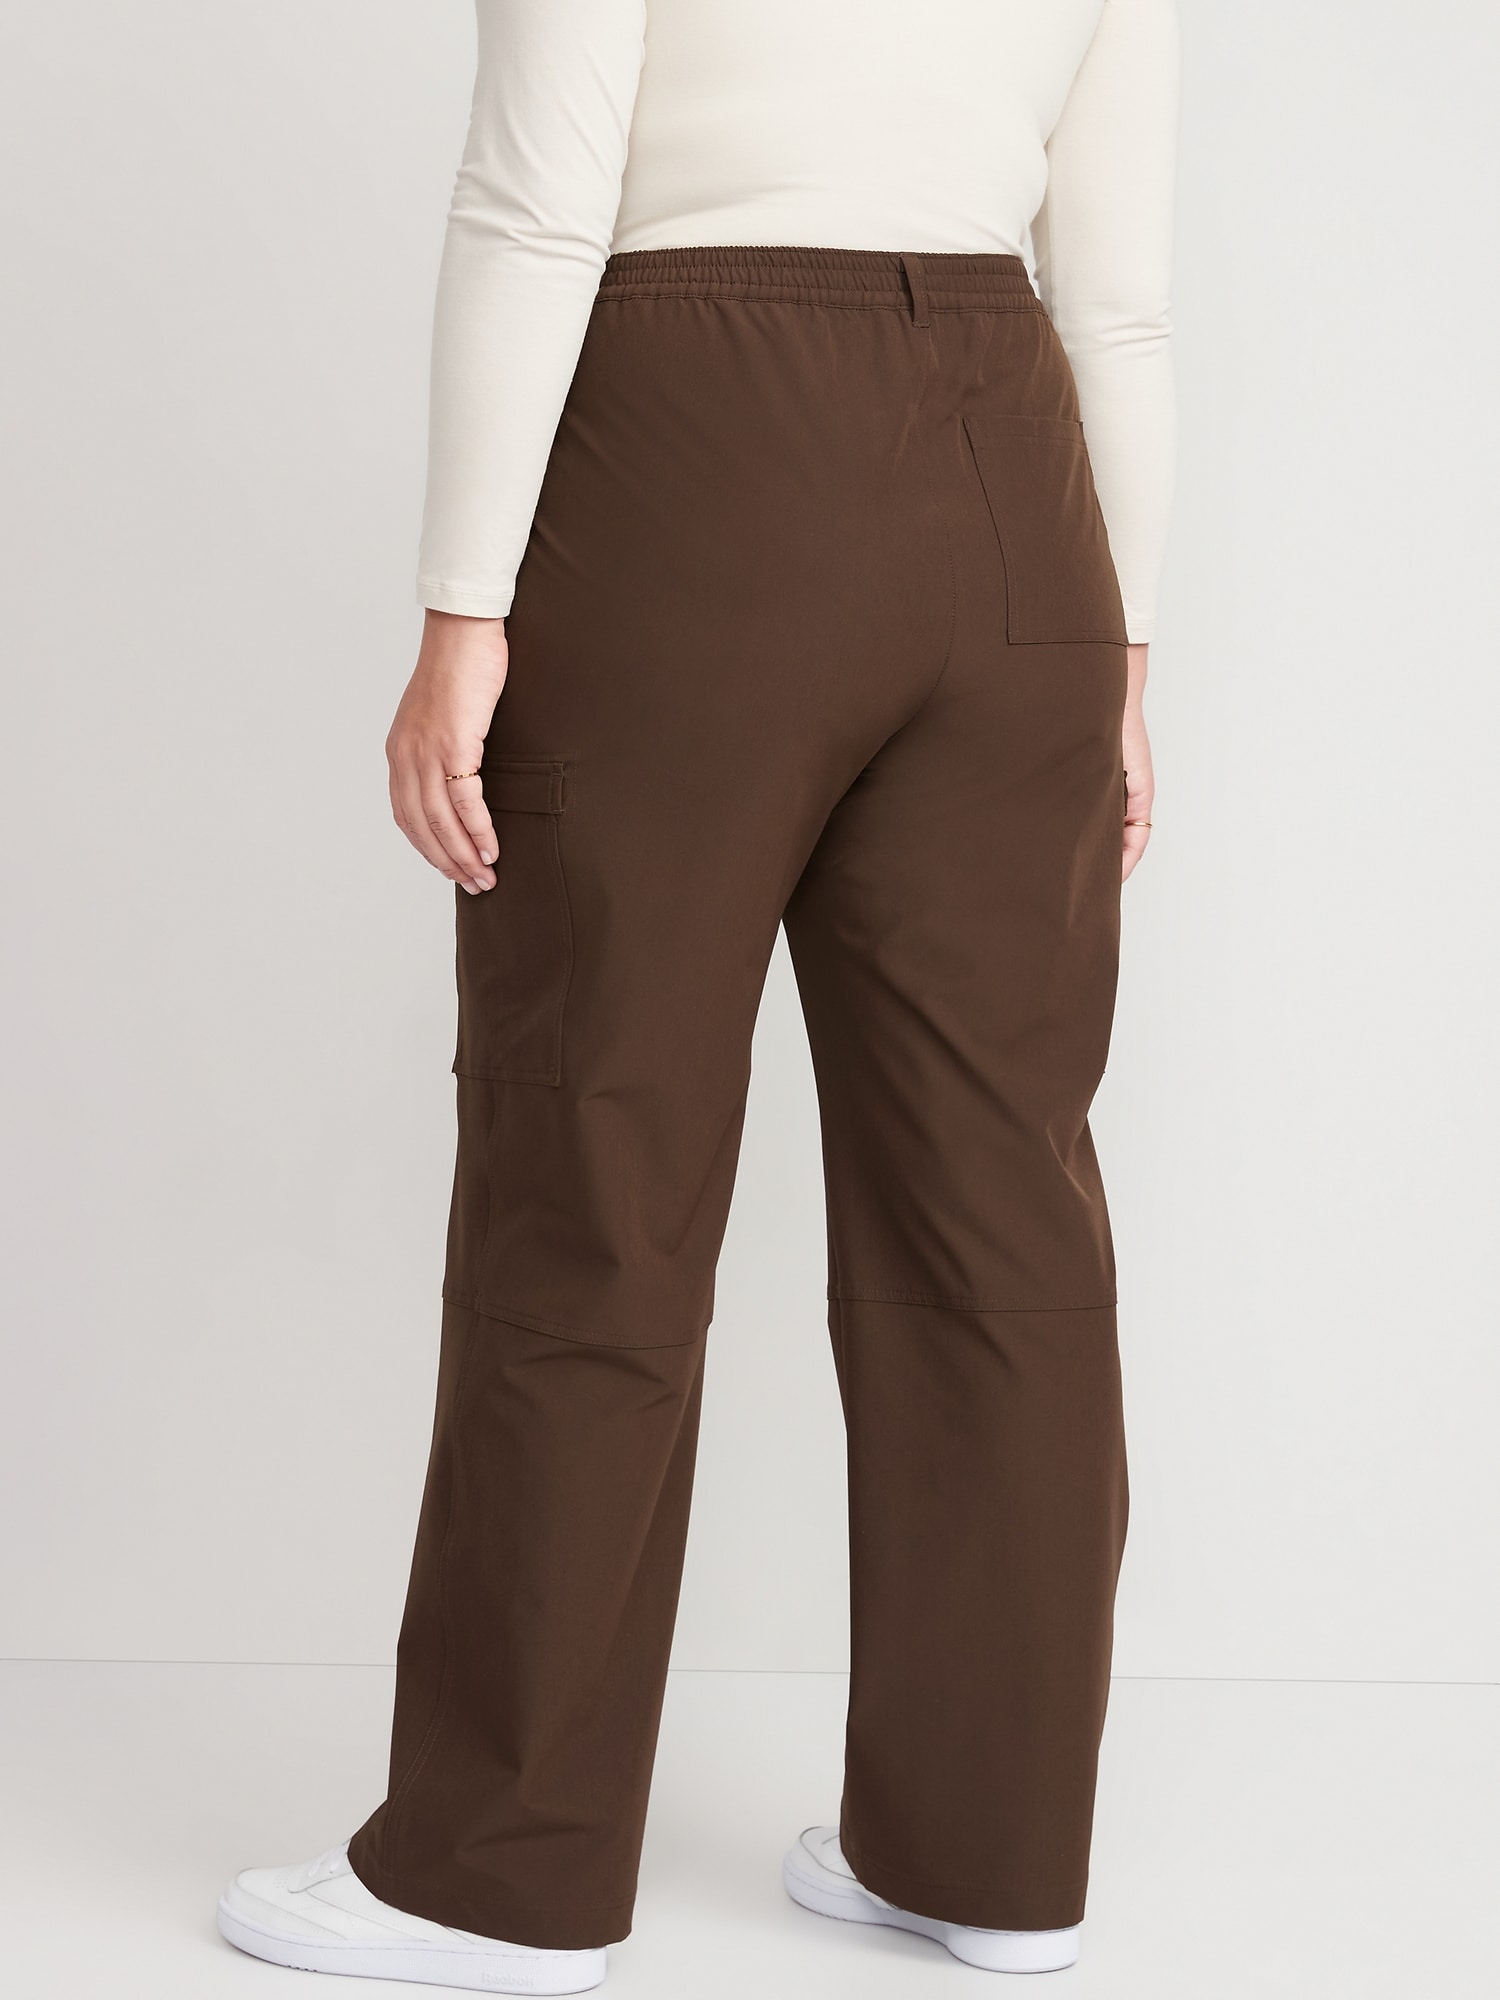 Old Navy Girls' High-Waisted Stretchtech Cargo Jogger Performance Pants Brown Regular Size S